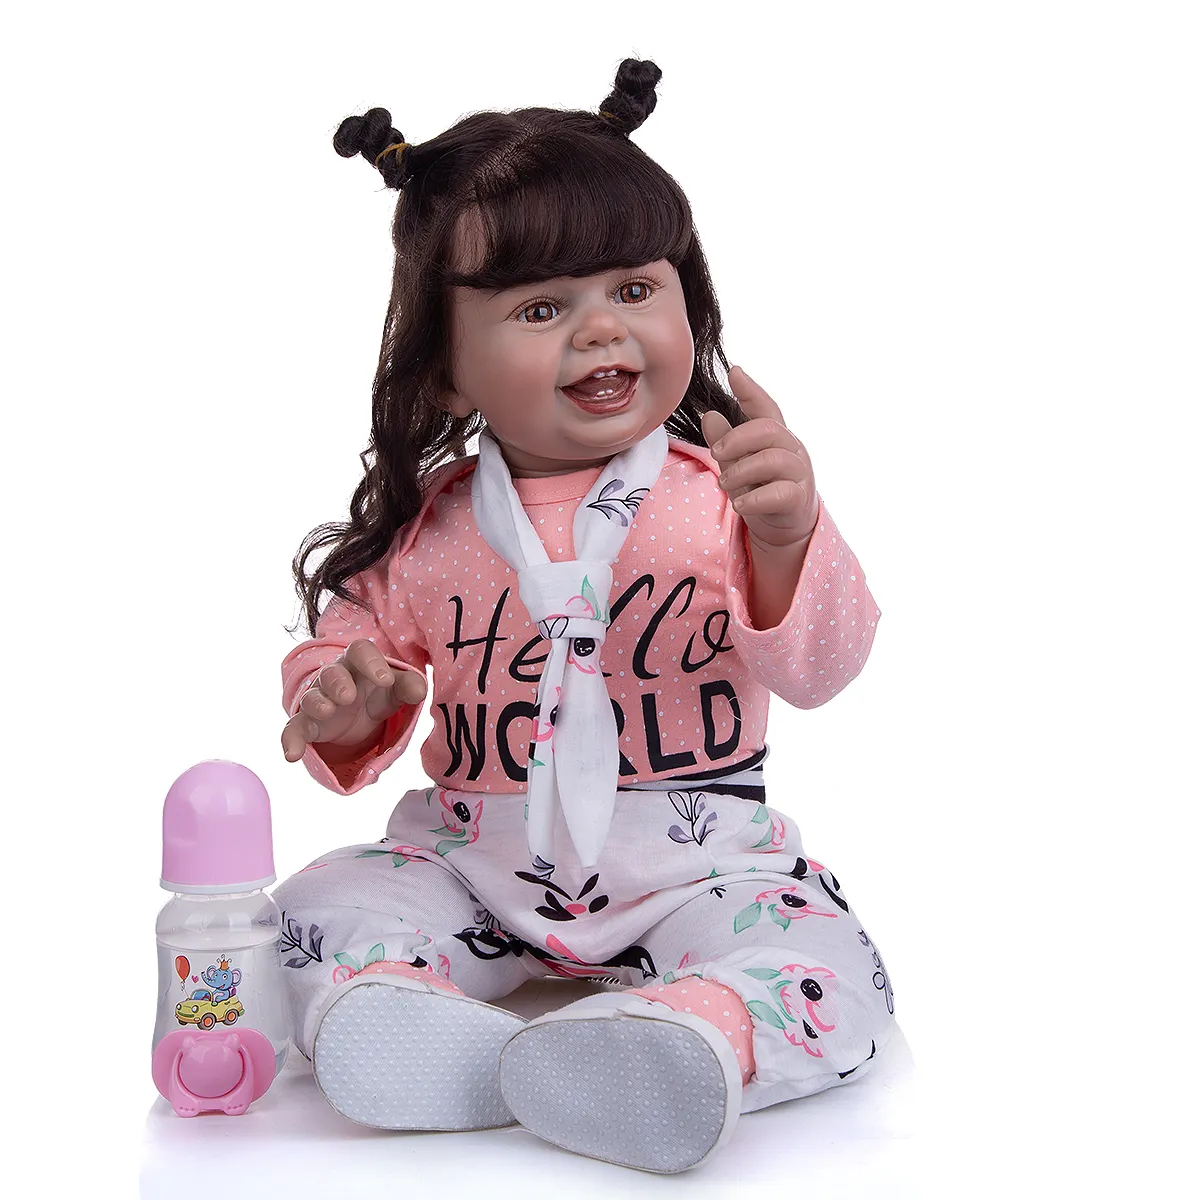 27 Inch Hand Painting Toddler Long Rooted Hair Reborn Cloth Body Baby Dolls Charming Smile Doll Toys Kids Birthday Gifts